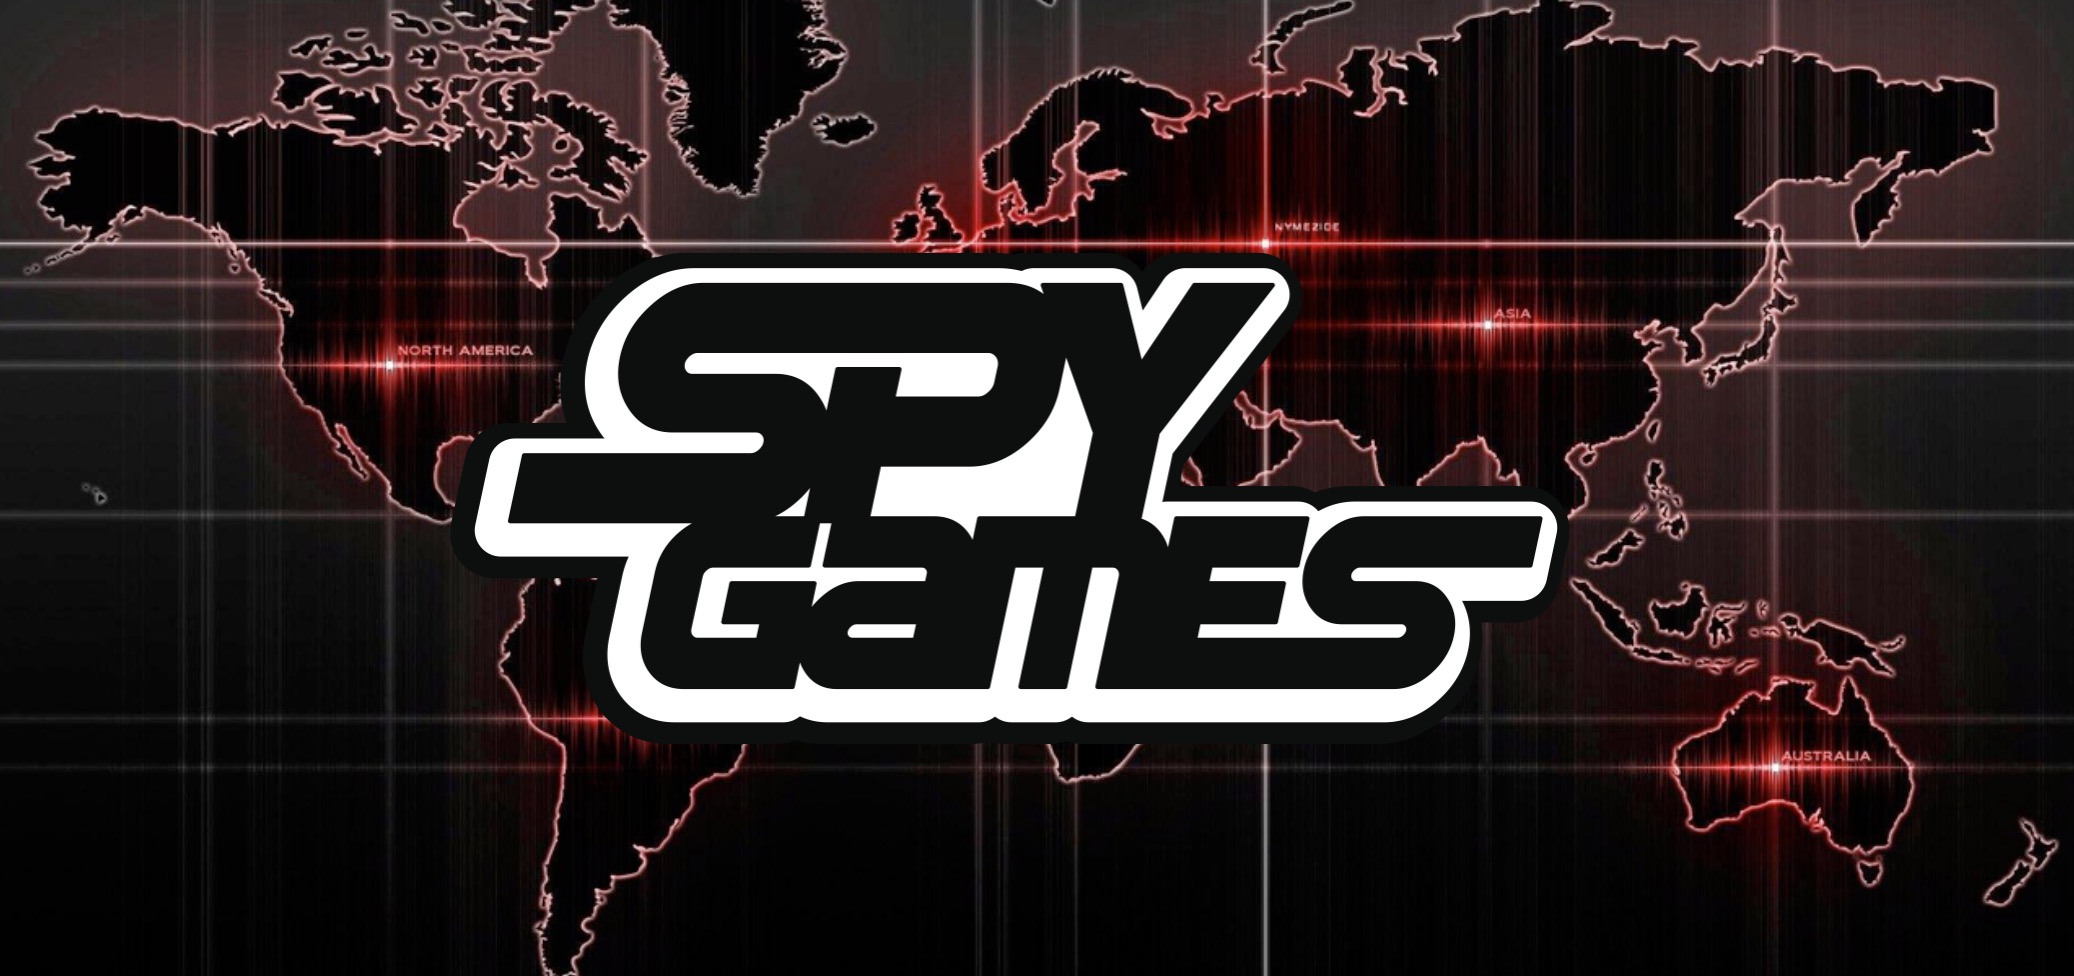 During this series, we're going to gather intelligence and decode everything you need to get smart and be a super spy with a license to chill! We may be shaken, but not stirred - that's because we have a born-again identity that will help us infiltrate, break codes, and bug the enemy. This assignment is classified, so get ready and get wired for your next top-secret mission - Code Name: Spy Games!